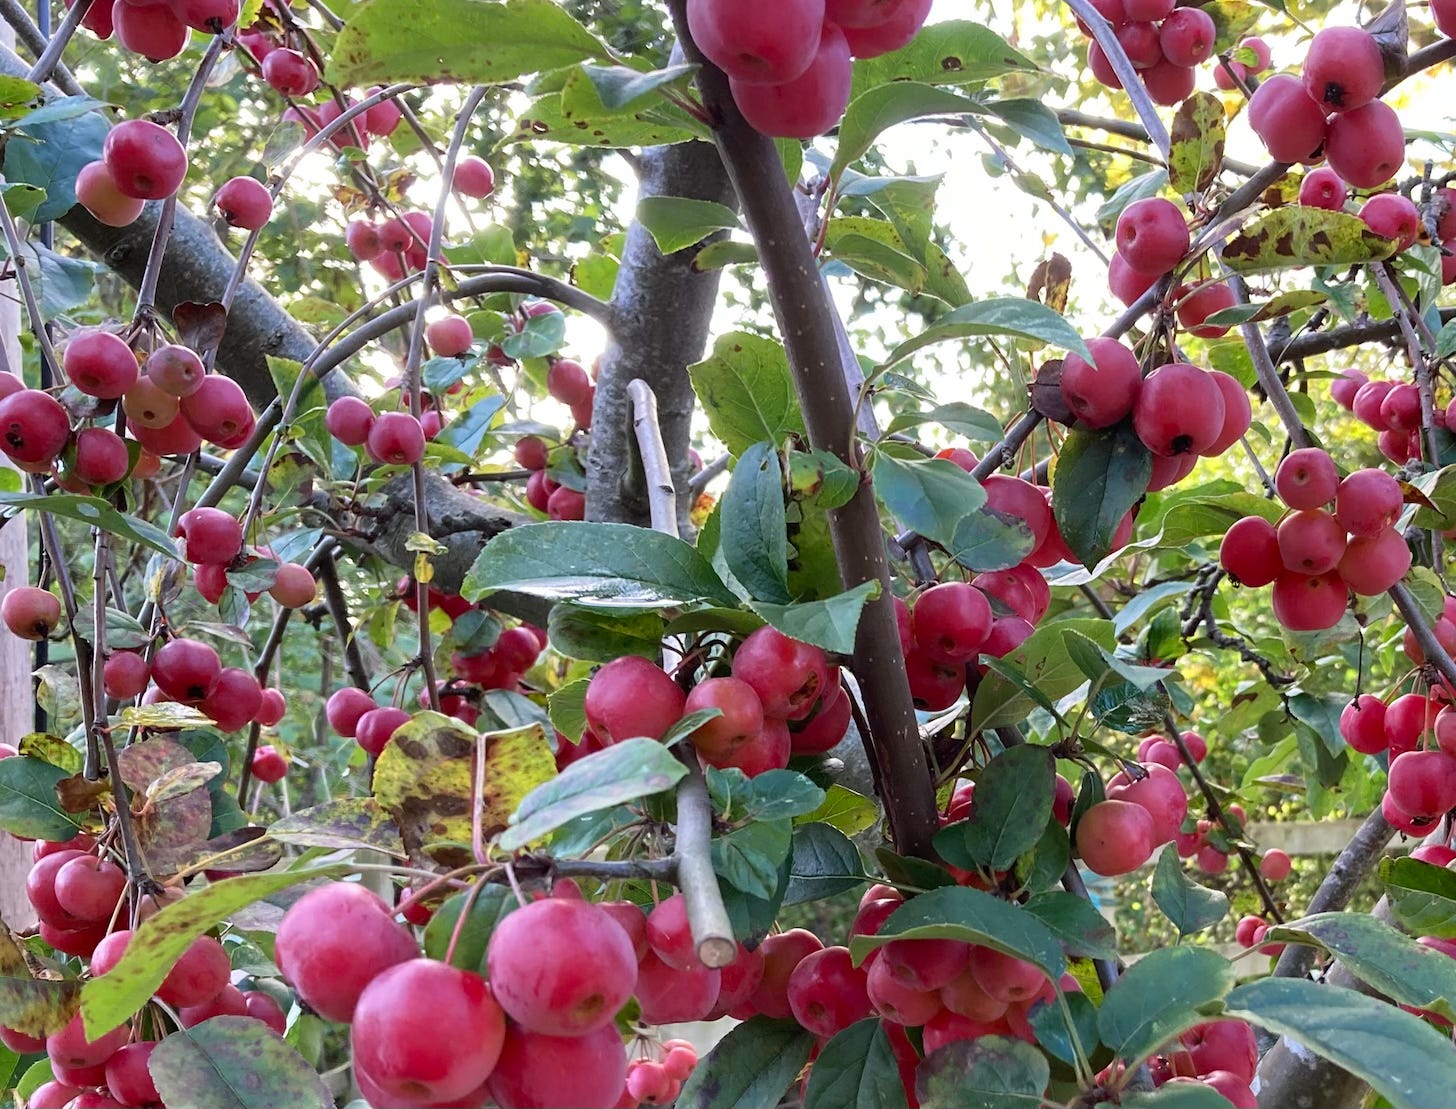 rose red crab apples on branches